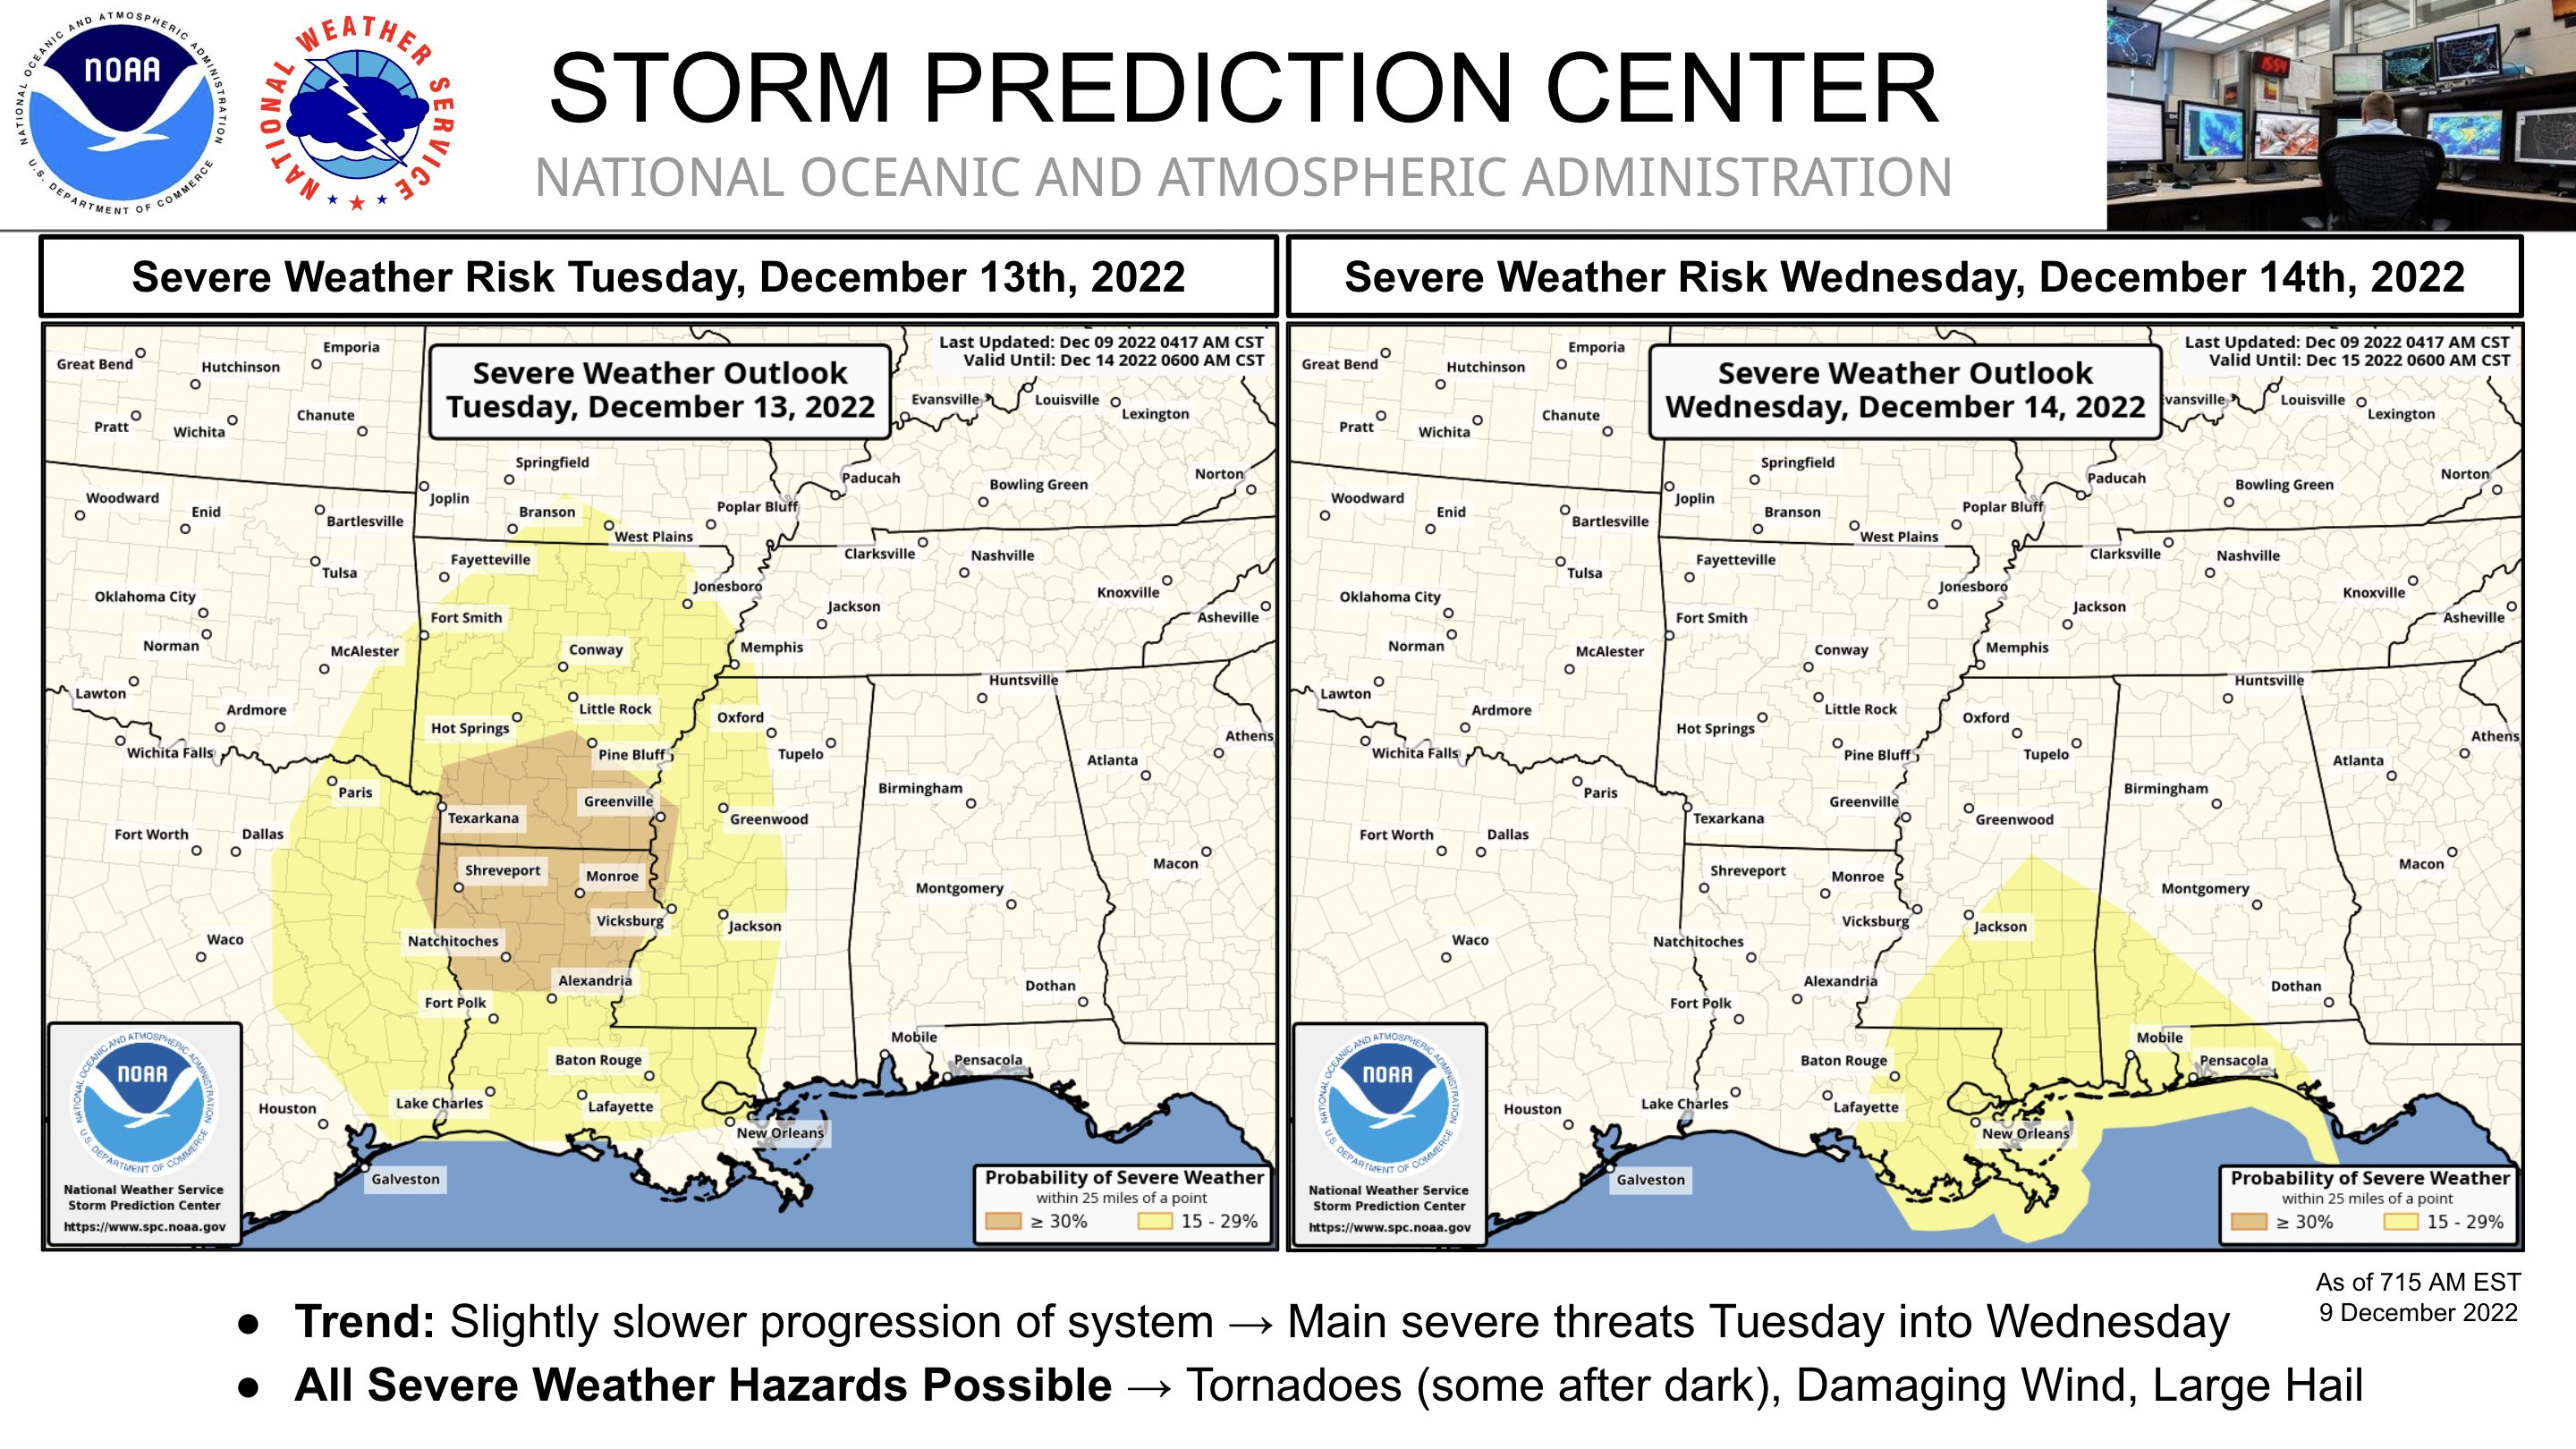 NWS Storm Center Twitter: "12/9/22: Severe storms capable of all hazards (including tornadoes) are expected across the lower Mississippi Valley on Tuesday 12/13, spreading eastward the central Gulf